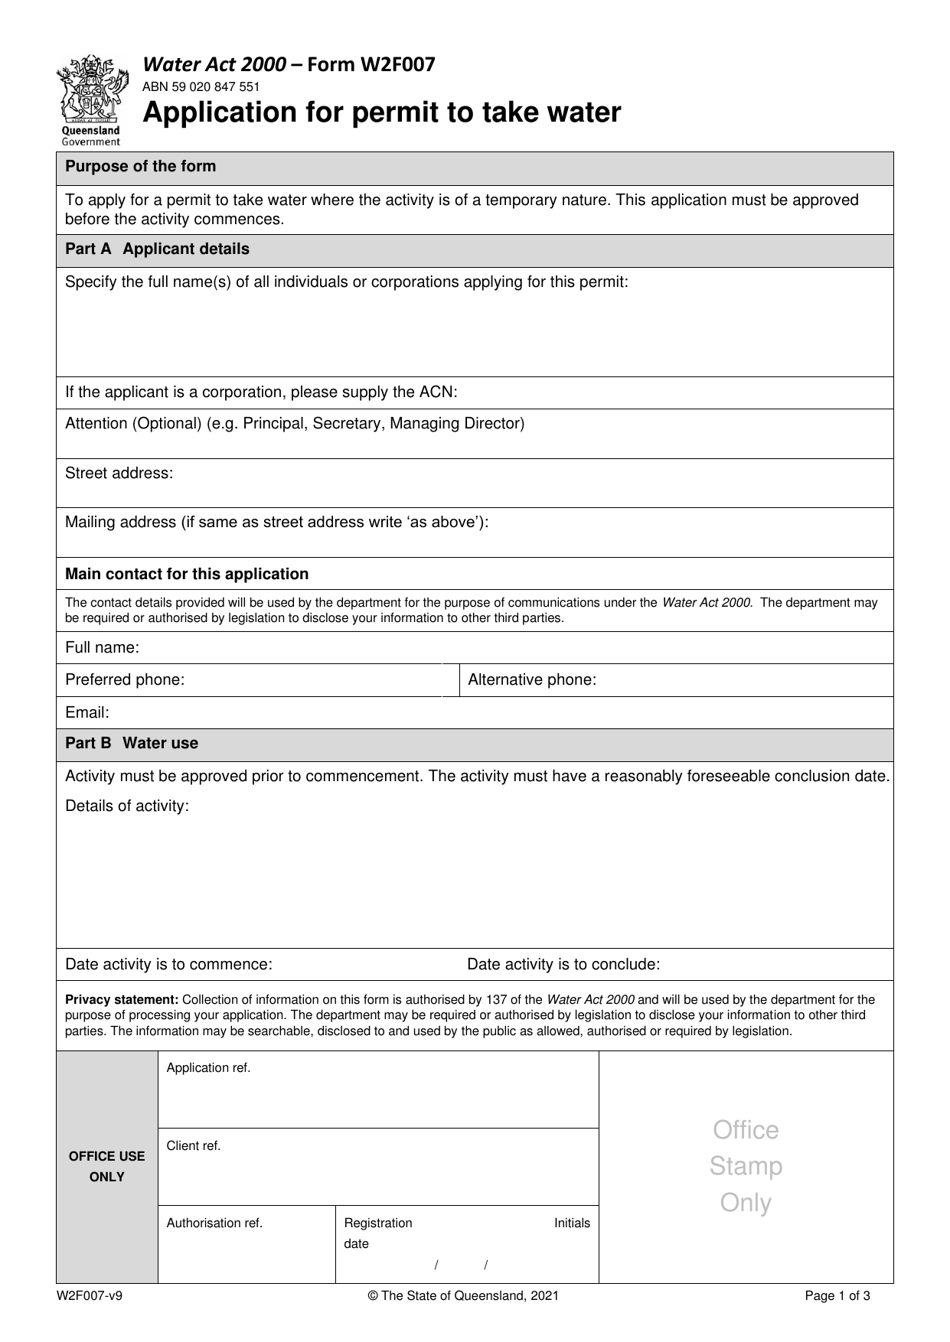 Form W2F007 Application for Permit to Take Water - Queensland, Australia, Page 1